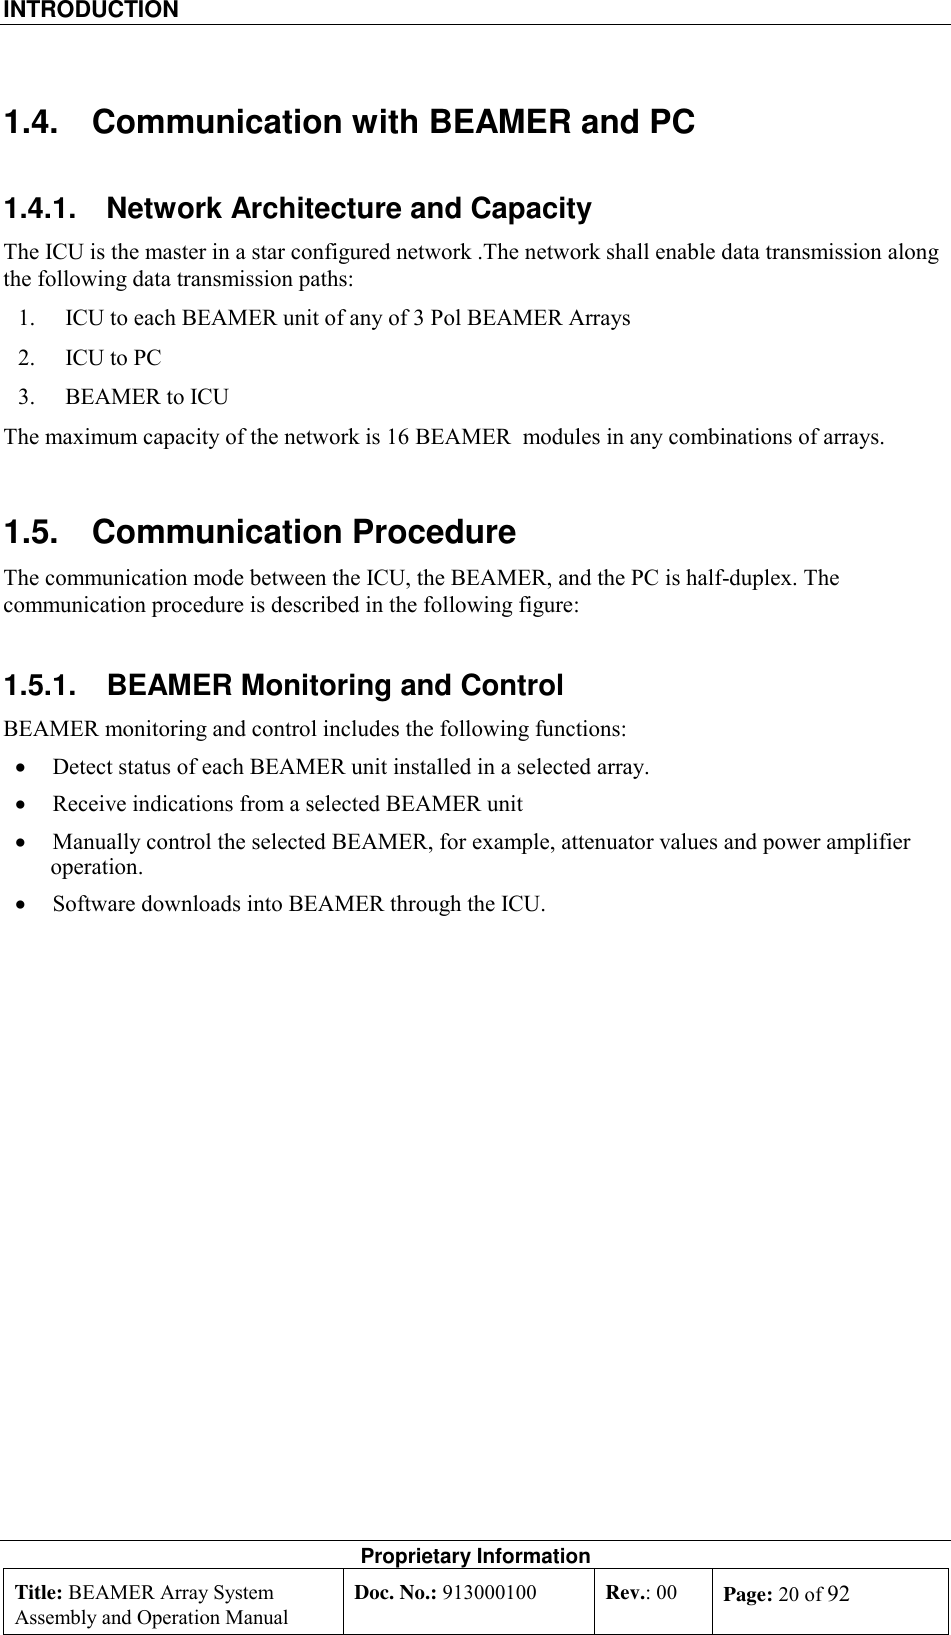 INTRODUCTION    Proprietary Information Title: BEAMER Array System Assembly and Operation Manual Doc. No.: 913000100  Rev.: 00  Page: 20 of 92  1.4.  Communication with BEAMER and PC 1.4.1.  Network Architecture and Capacity The ICU is the master in a star configured network .The network shall enable data transmission along the following data transmission paths: 1.  ICU to each BEAMER unit of any of 3 Pol BEAMER Arrays 2.  ICU to PC 3.  BEAMER to ICU The maximum capacity of the network is 16 BEAMER  modules in any combinations of arrays. 1.5. Communication Procedure The communication mode between the ICU, the BEAMER, and the PC is half-duplex. The communication procedure is described in the following figure:  1.5.1.  BEAMER Monitoring and Control BEAMER monitoring and control includes the following functions: •  Detect status of each BEAMER unit installed in a selected array.  •  Receive indications from a selected BEAMER unit  •  Manually control the selected BEAMER, for example, attenuator values and power amplifier operation. •  Software downloads into BEAMER through the ICU. 